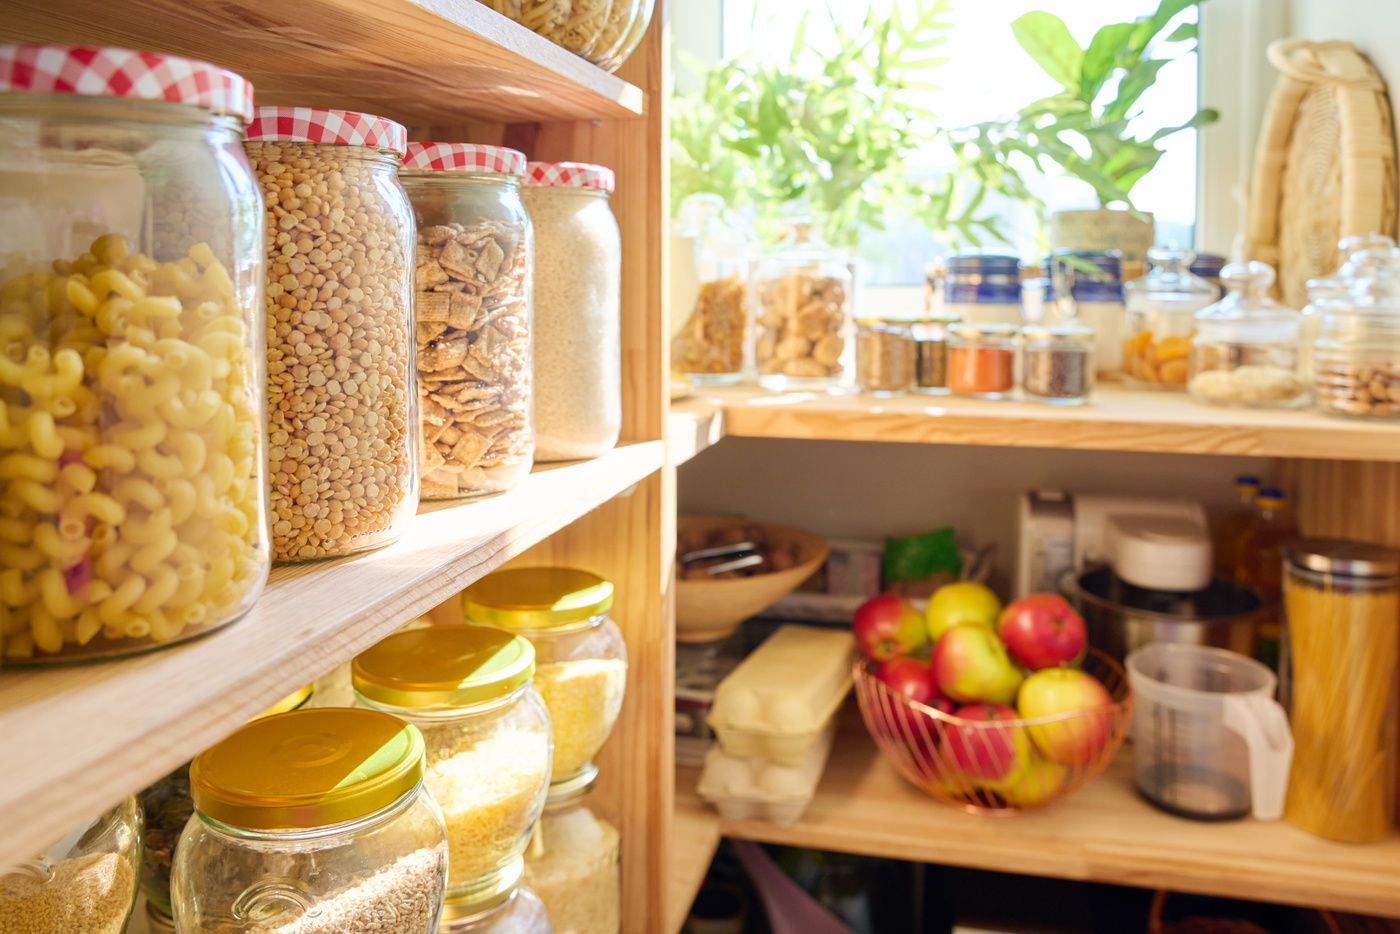 Storage of Food in the Kitchen in Pantry